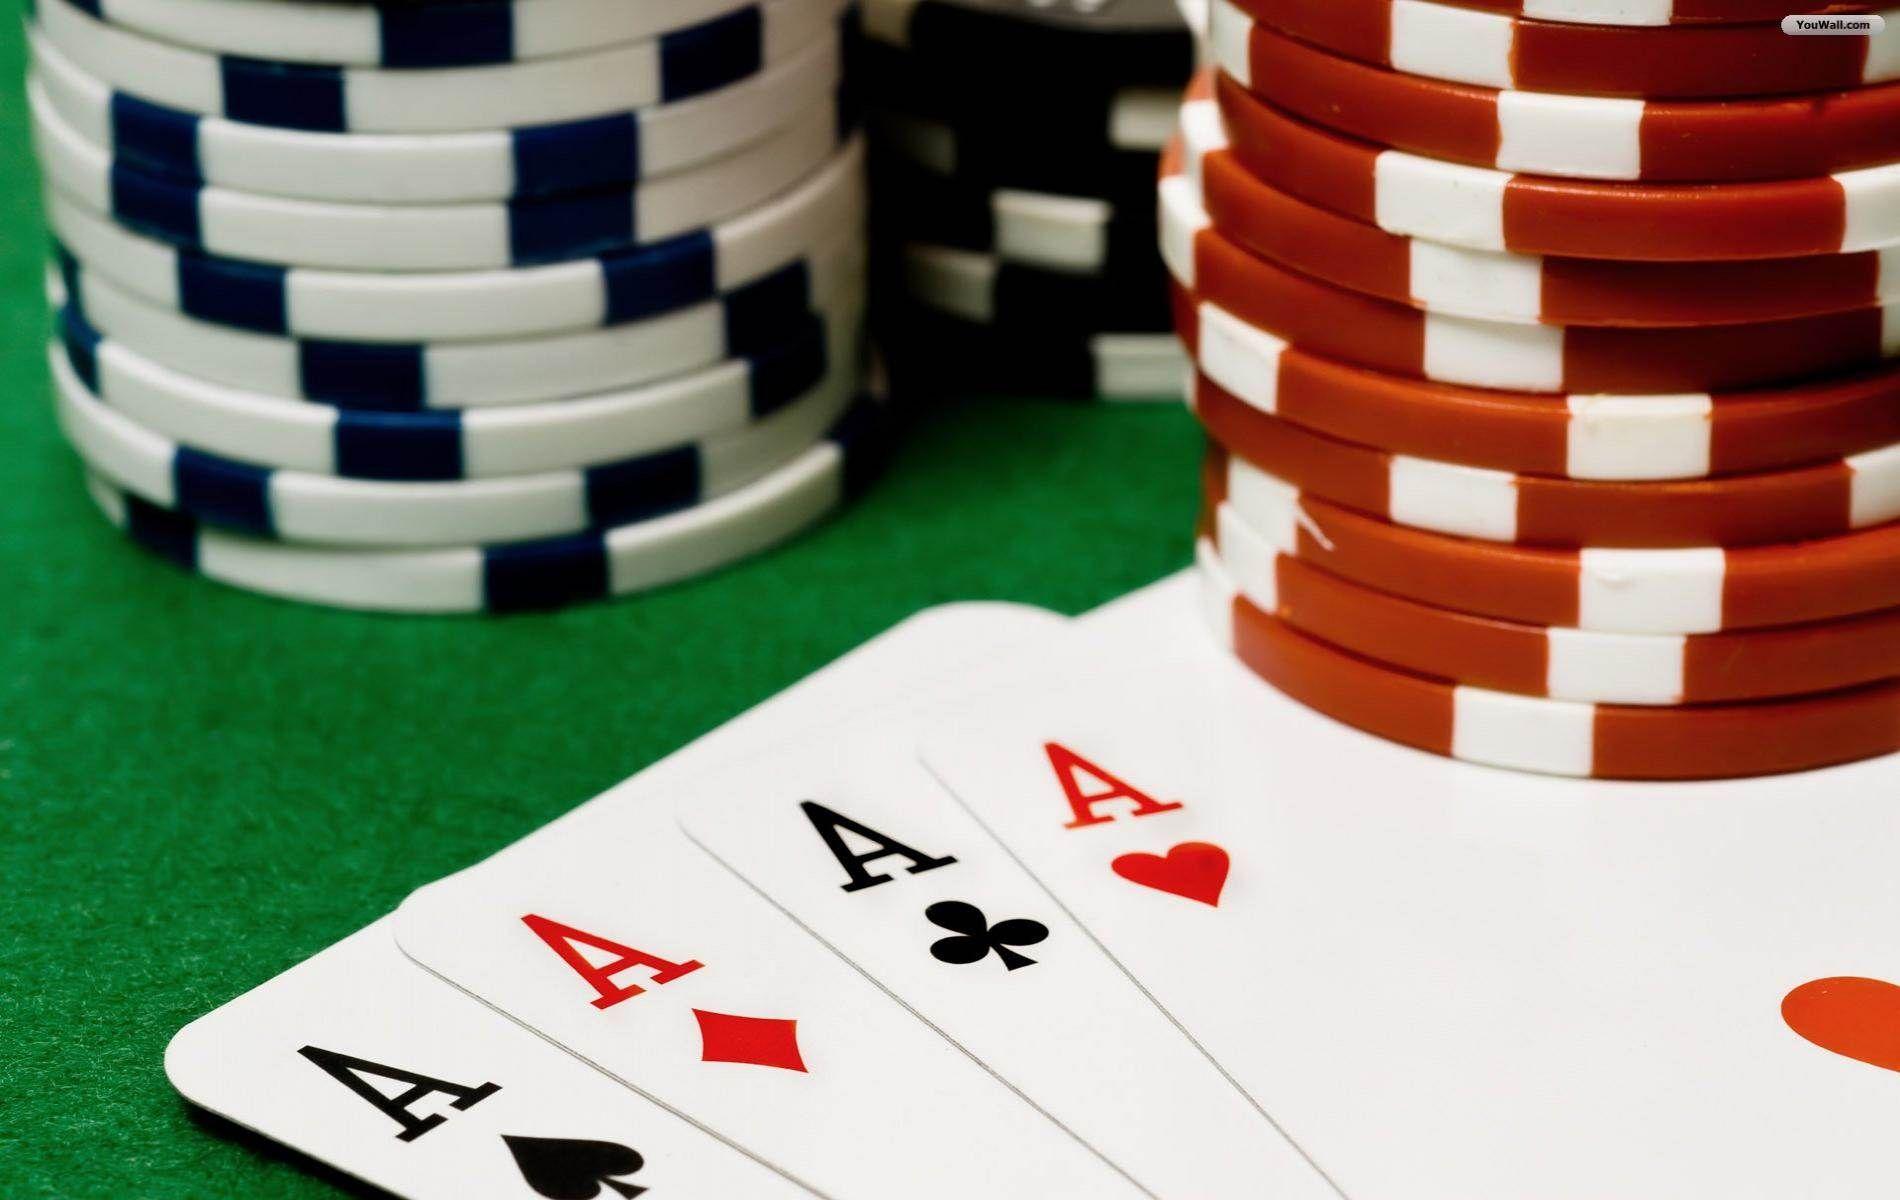 Web-Based Casinos: The Best Way to Win Big